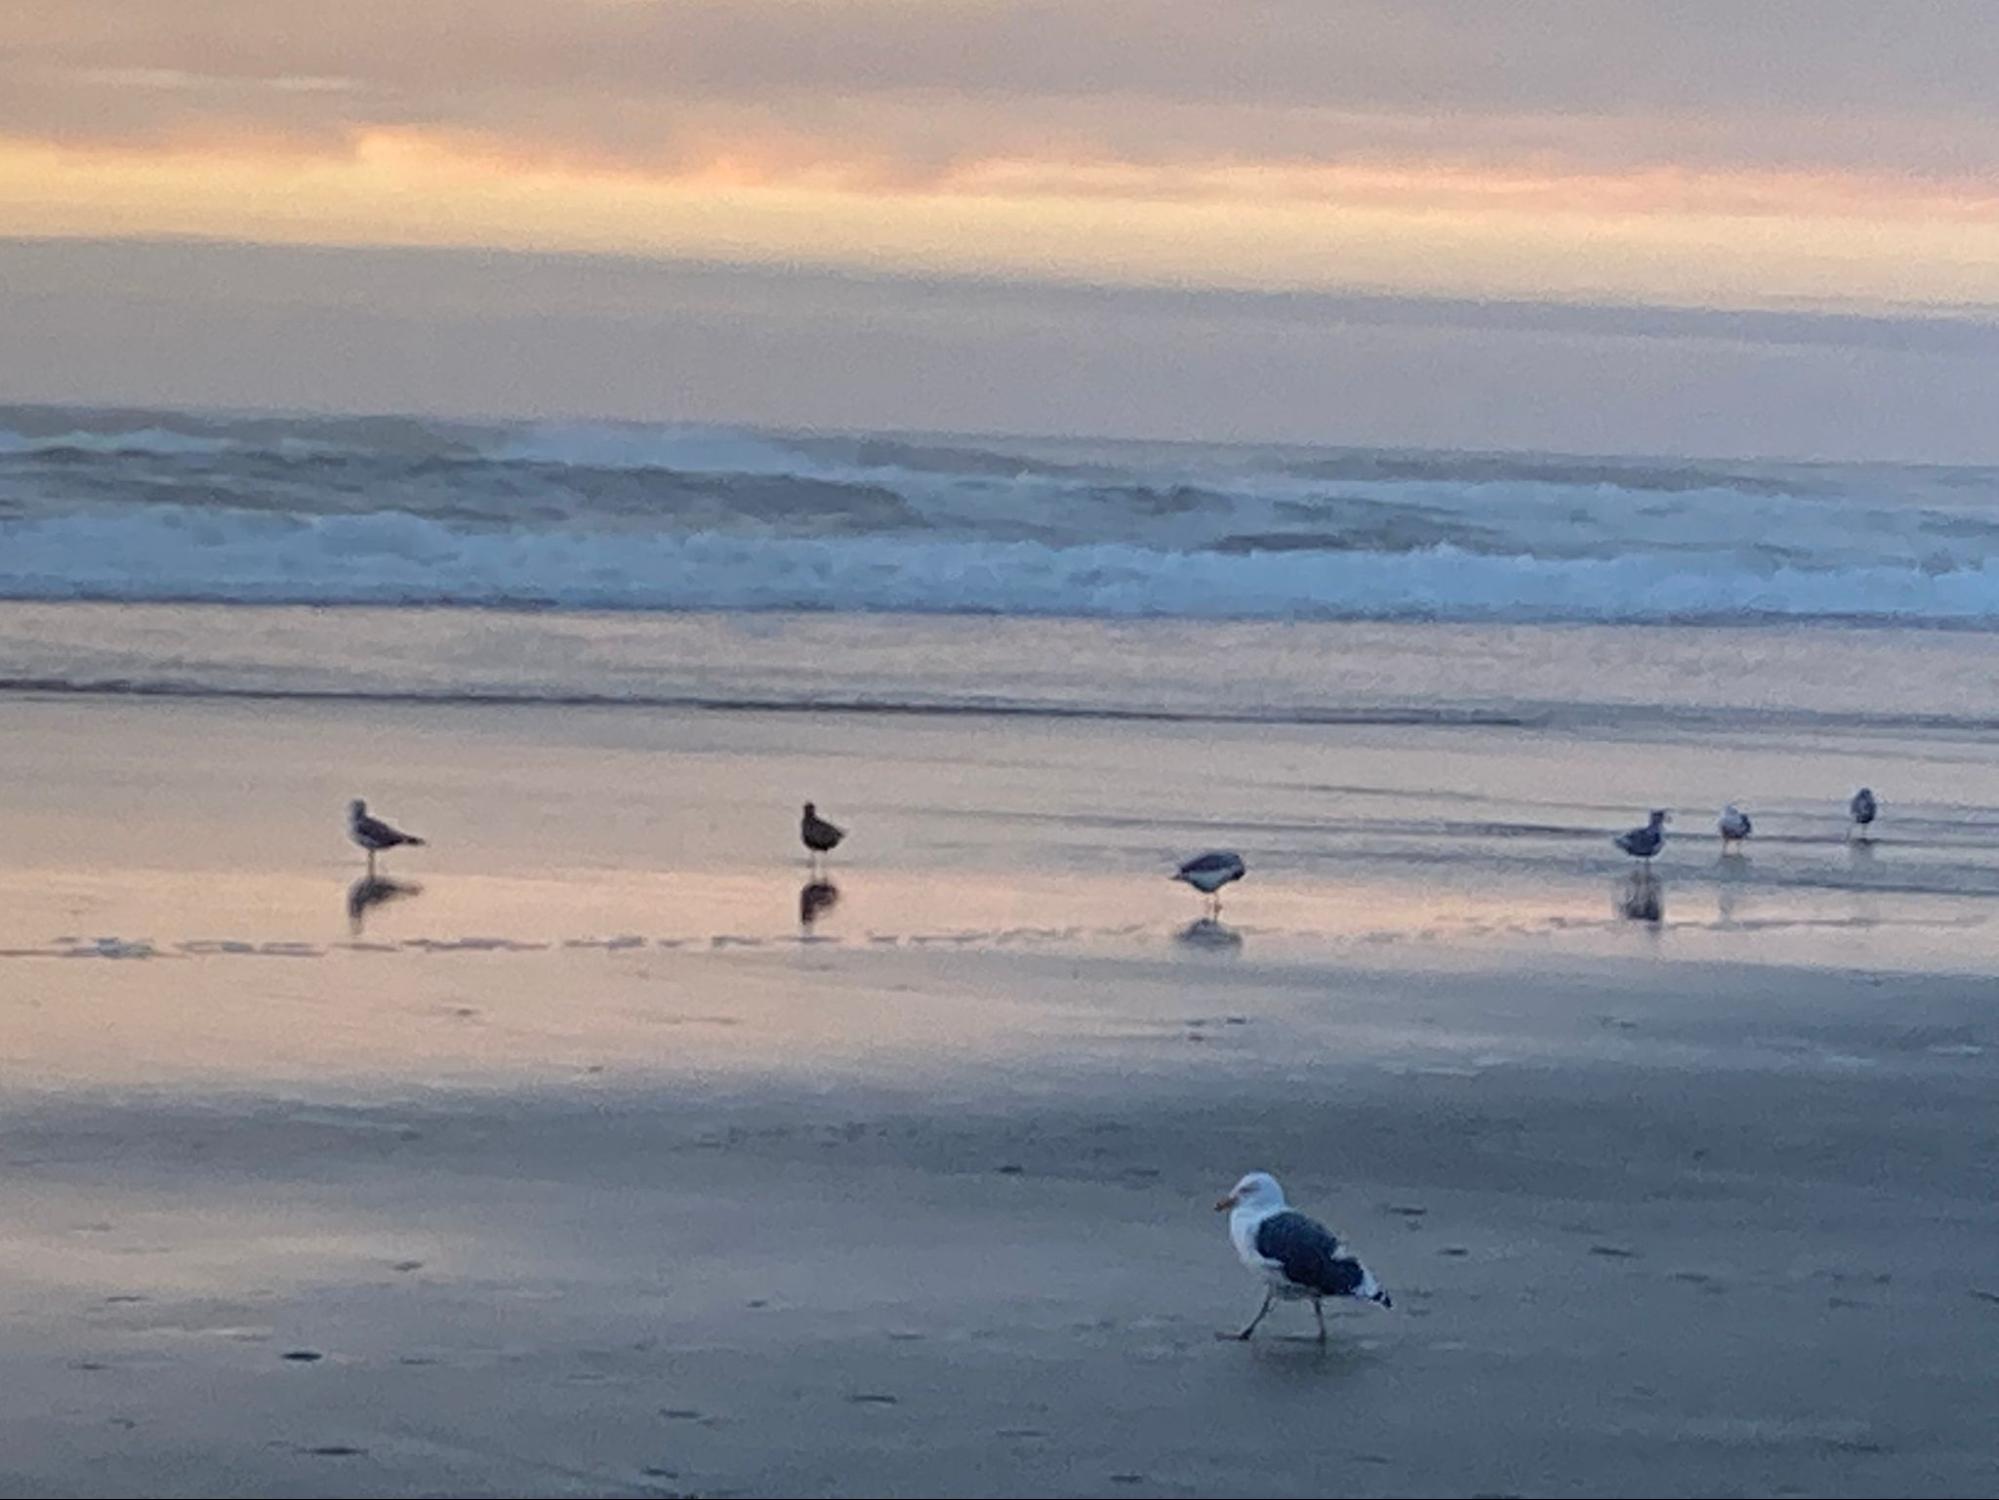 A serene view of the ocean with seagulls walking in the sand.